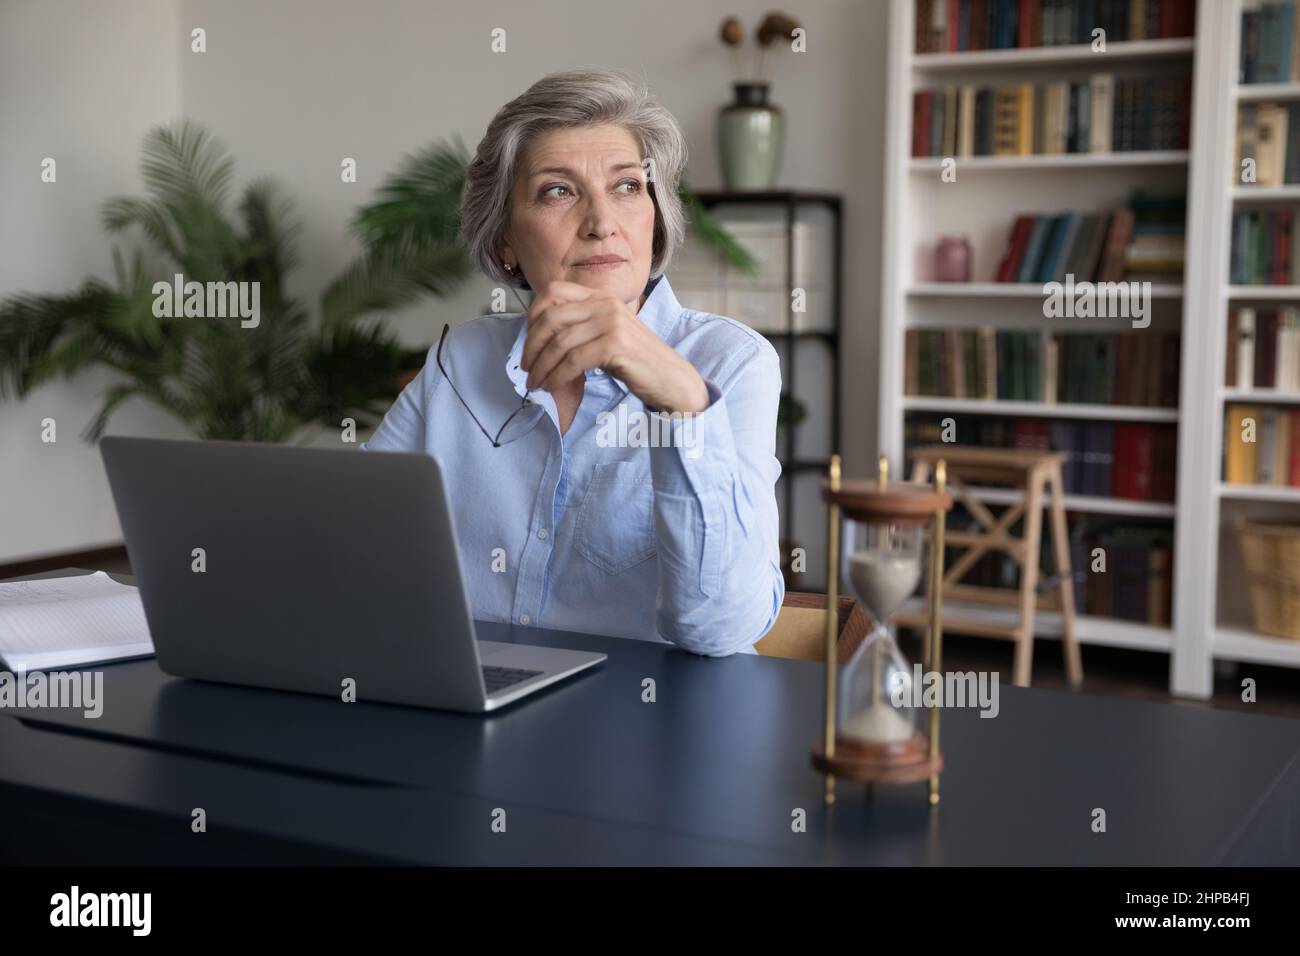 Thoughtful smart middle aged businesswoman working in office. Stock Photo